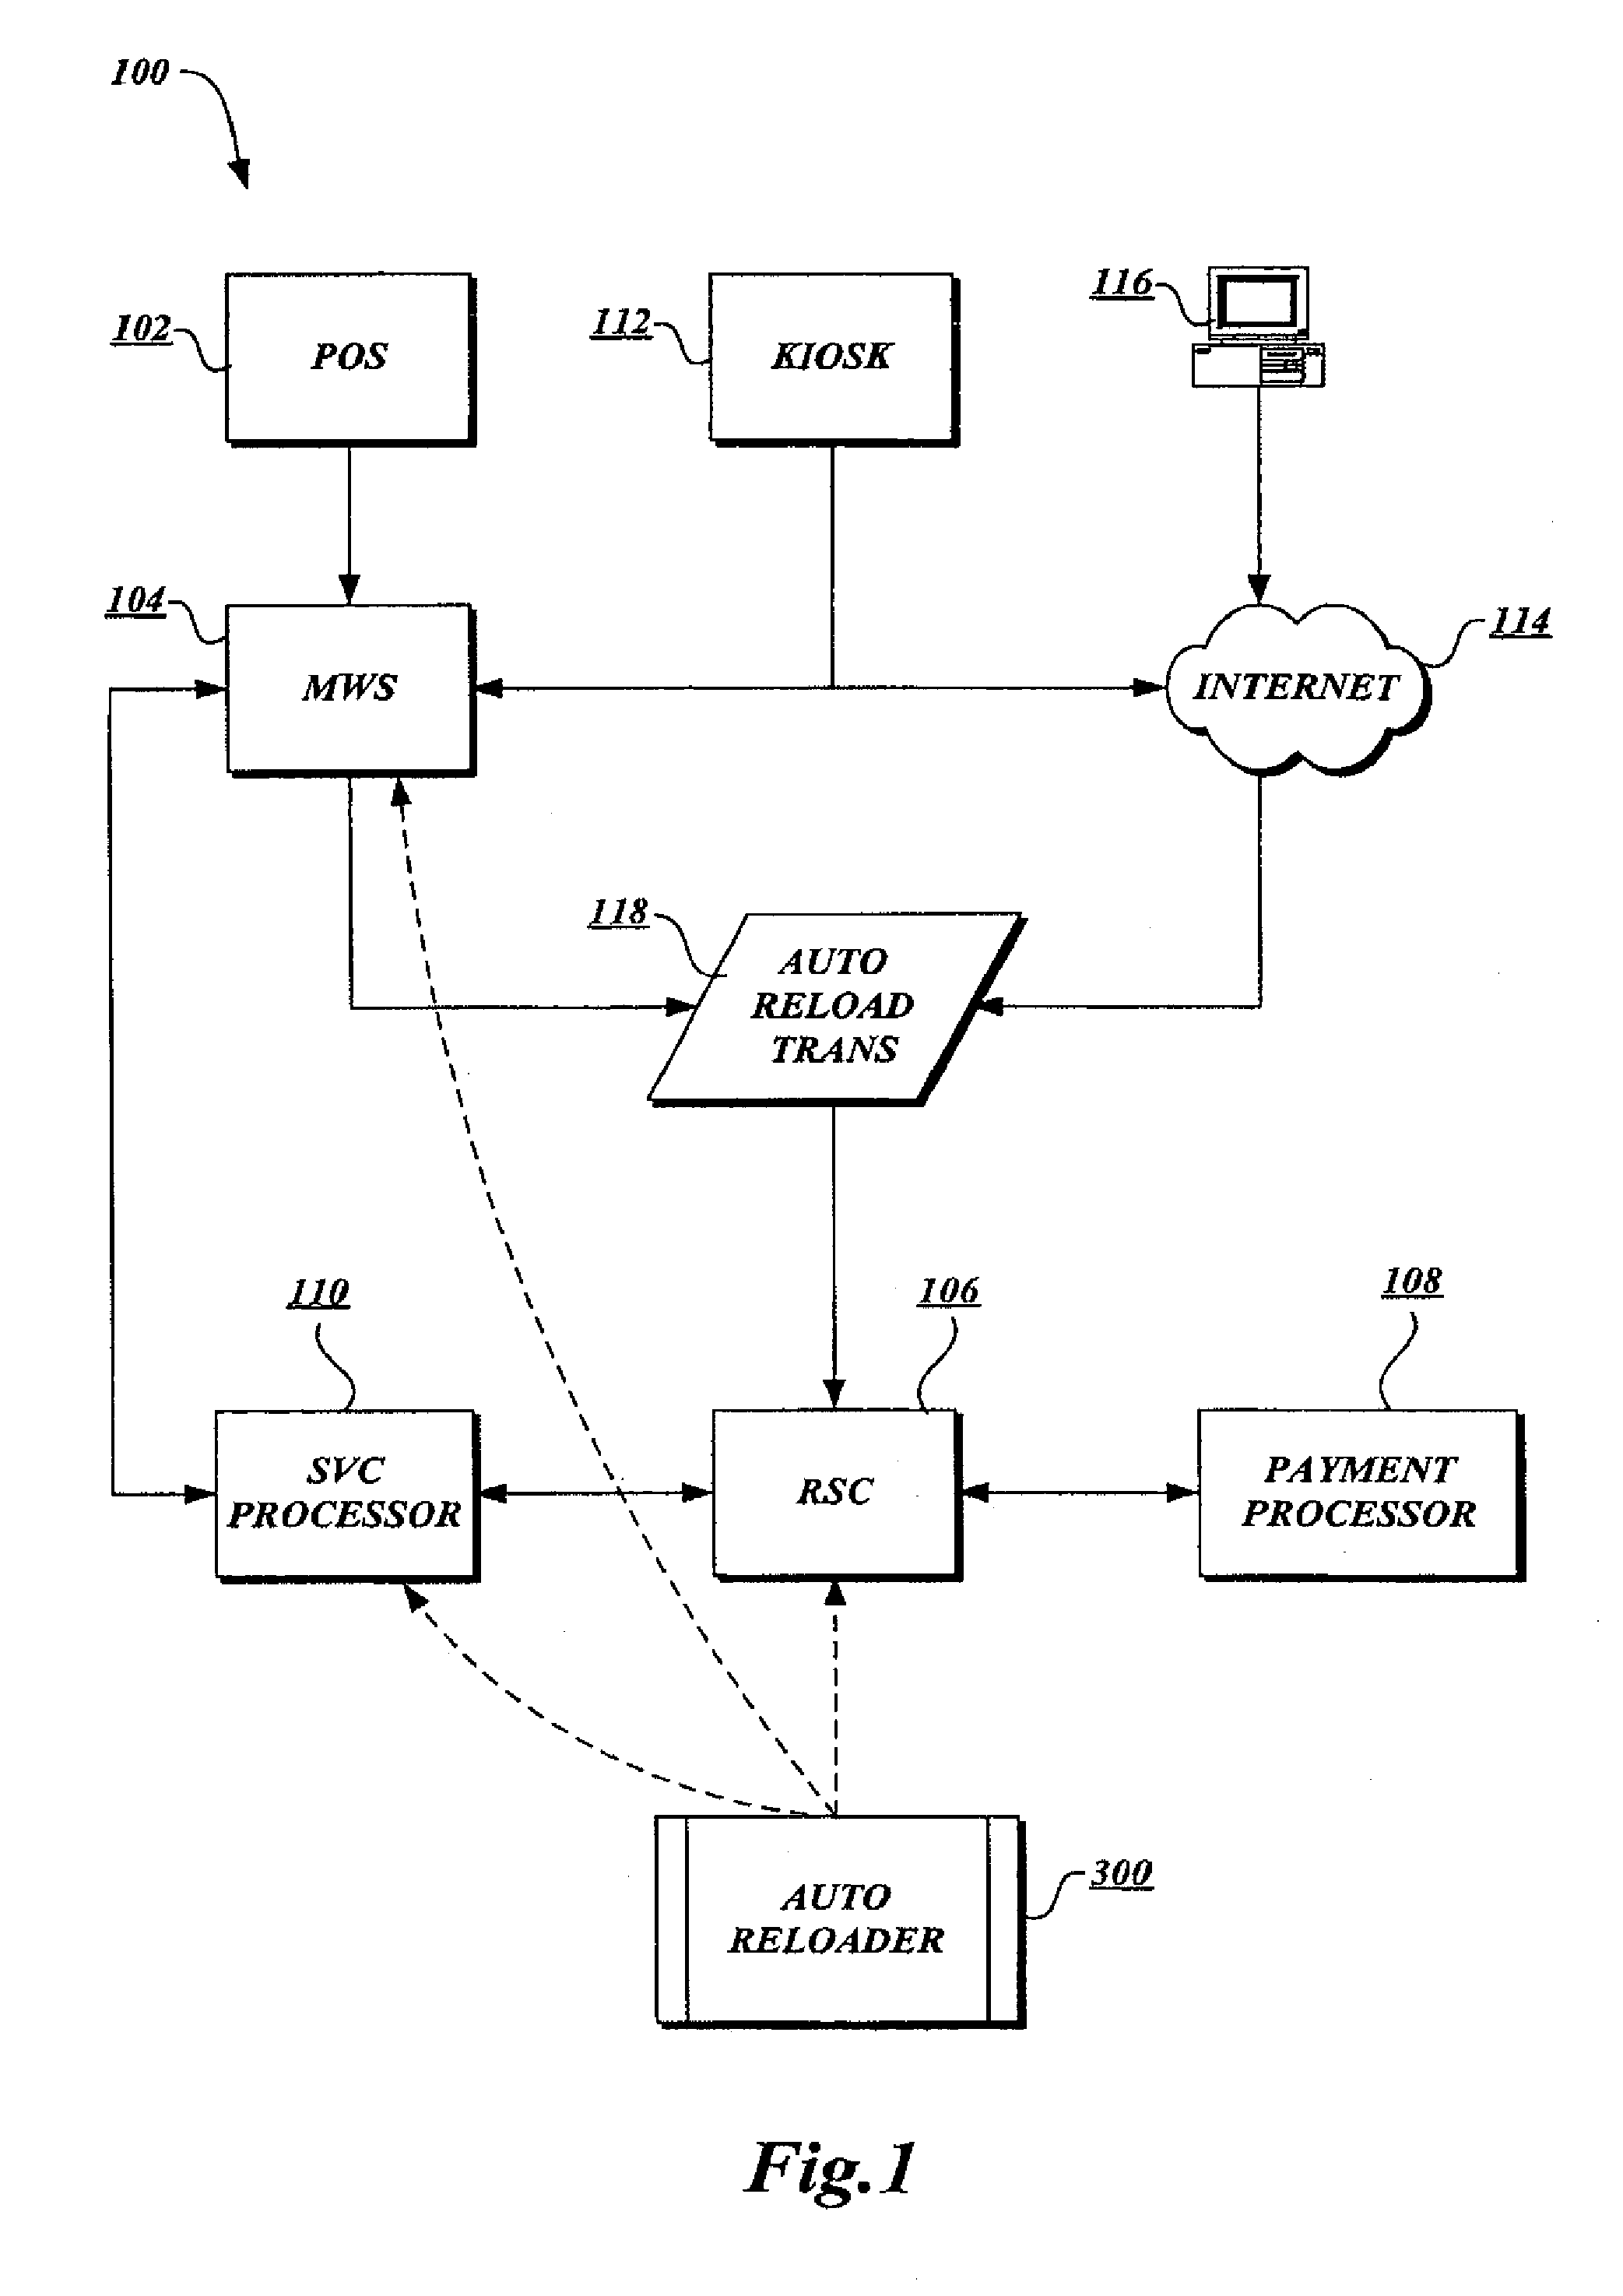 Method and apparatus for automatically reloading a stored value card